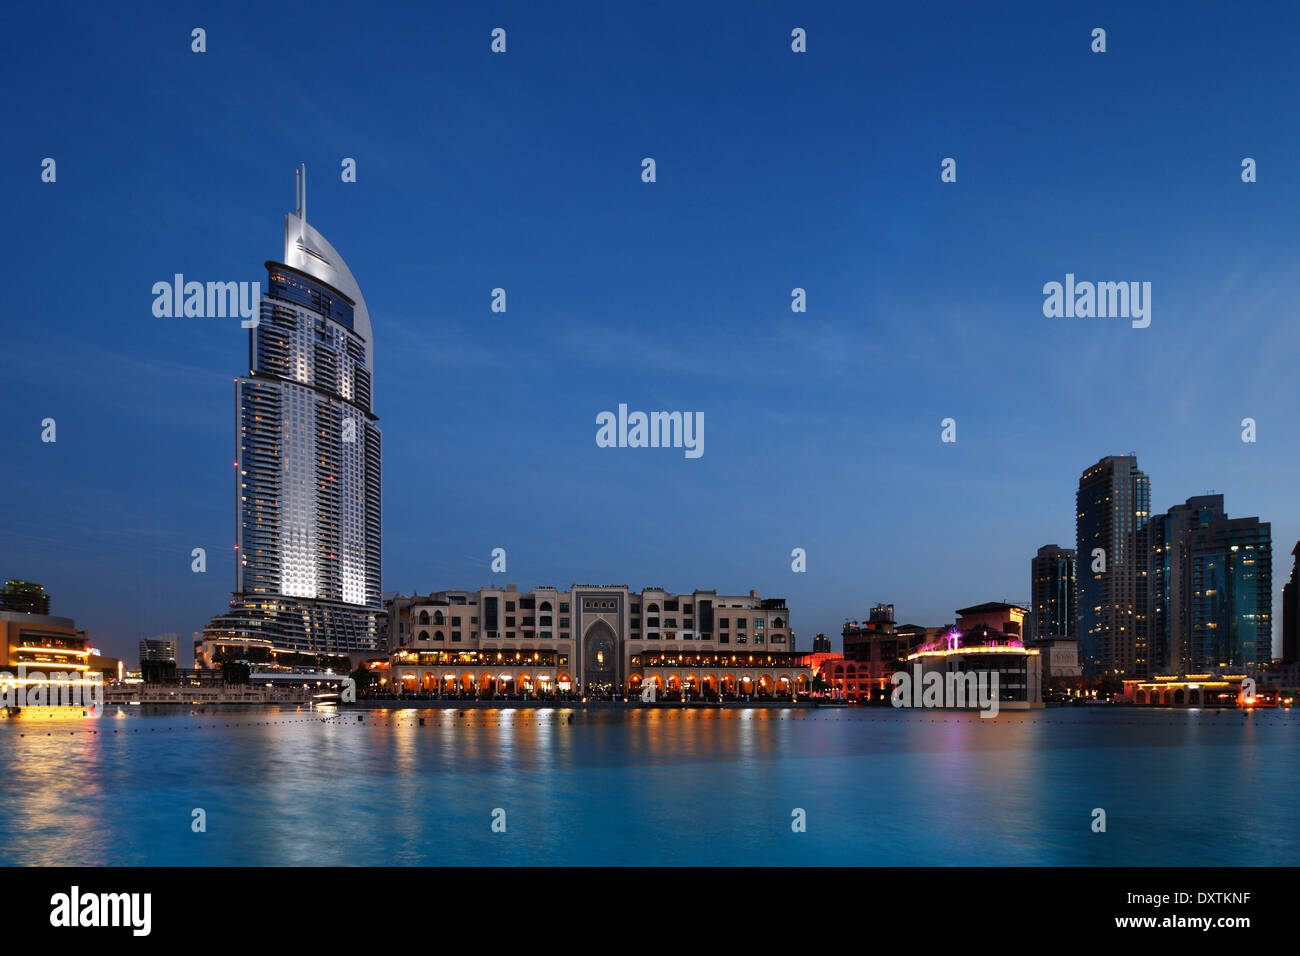 The Dubai Mall and The Address Hotel at Dusk as the Dubai Fountain sits still and acts as a perfect reflection pool Stock Photo